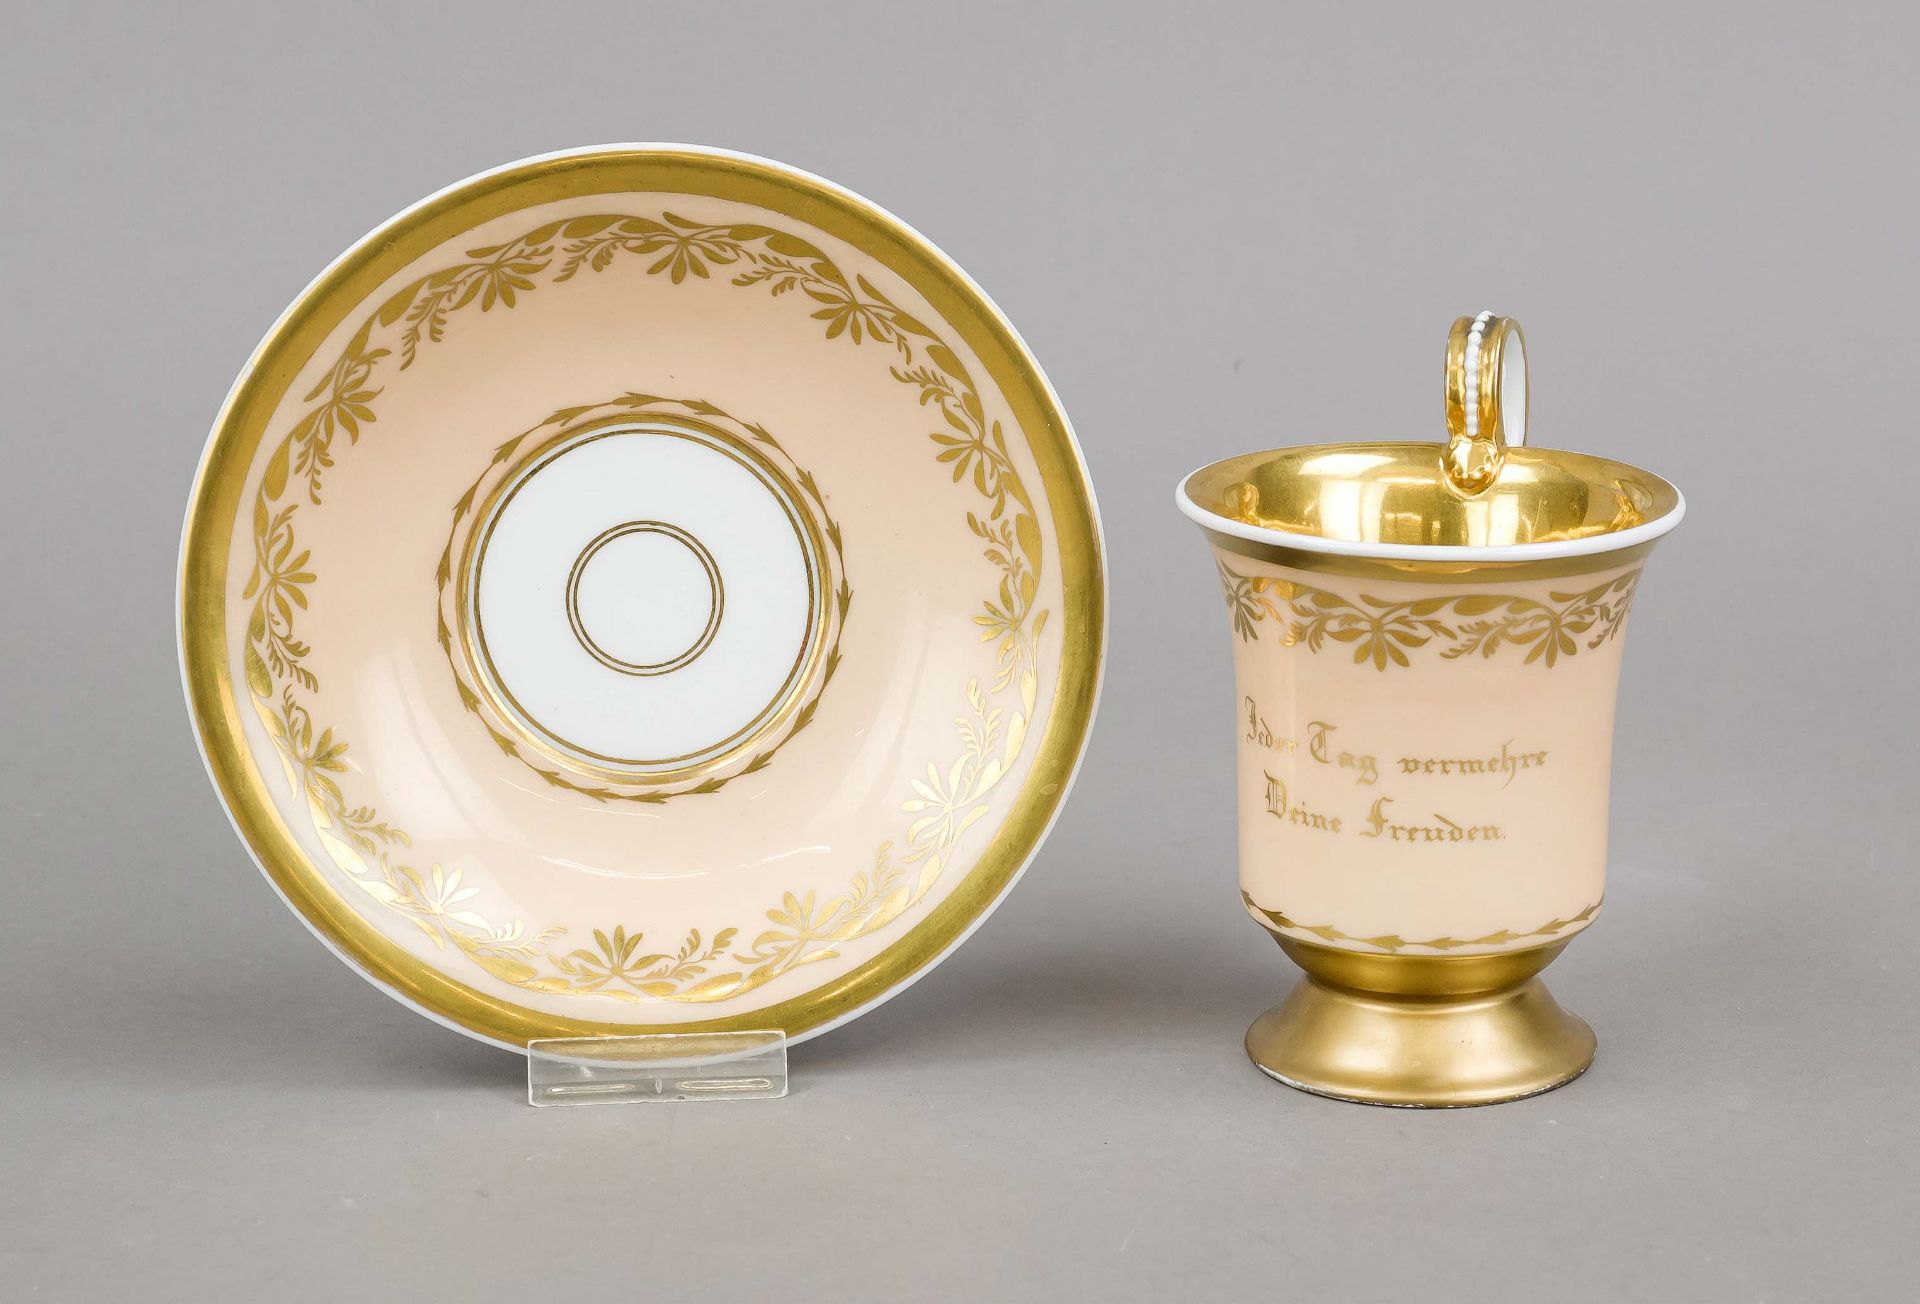 Cup with saucer, KPM Berlin, 1830s, 1st choice, bell shape with rosette handle, apricot ground